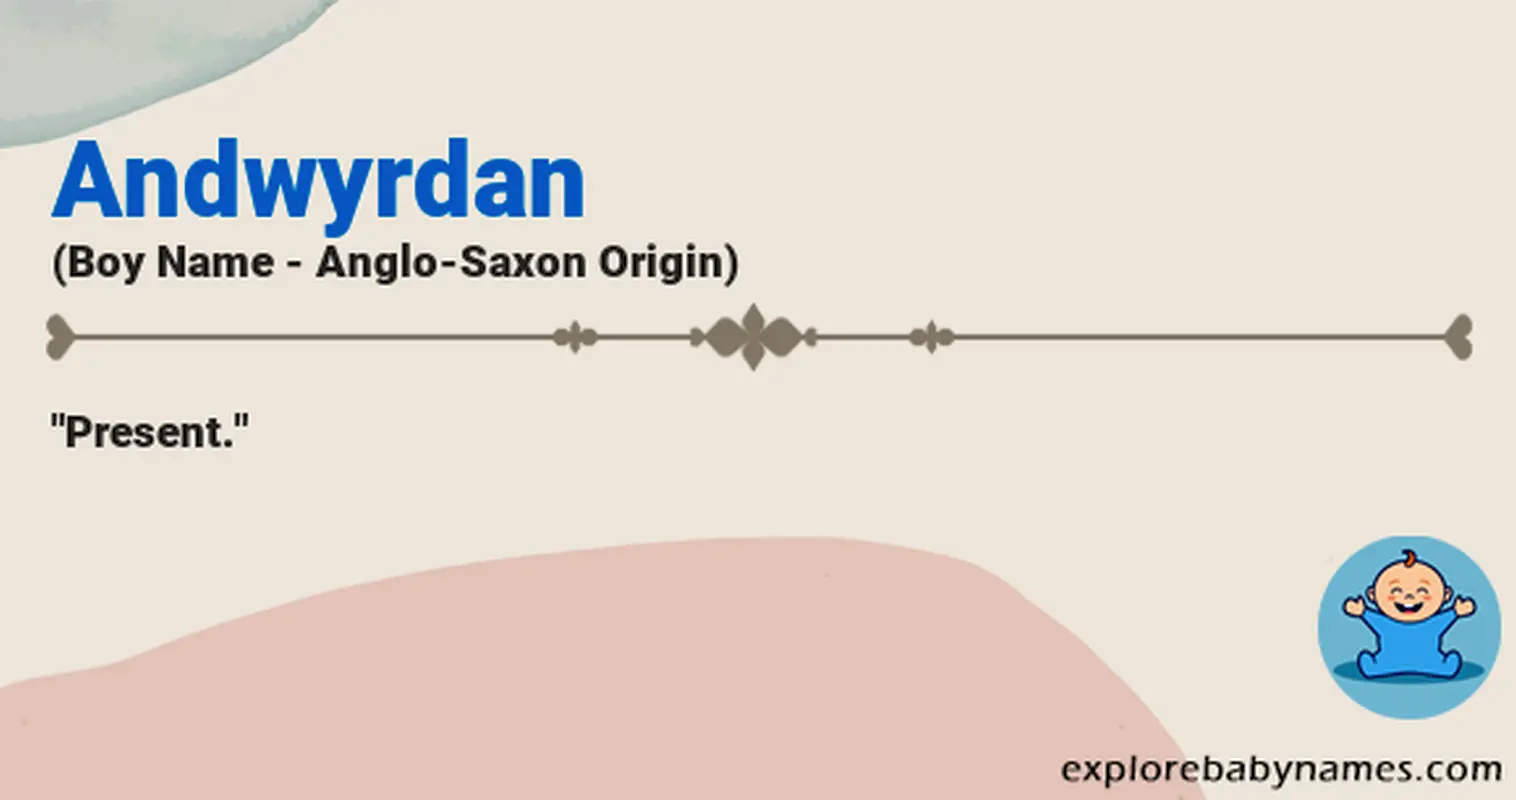 Meaning of Andwyrdan